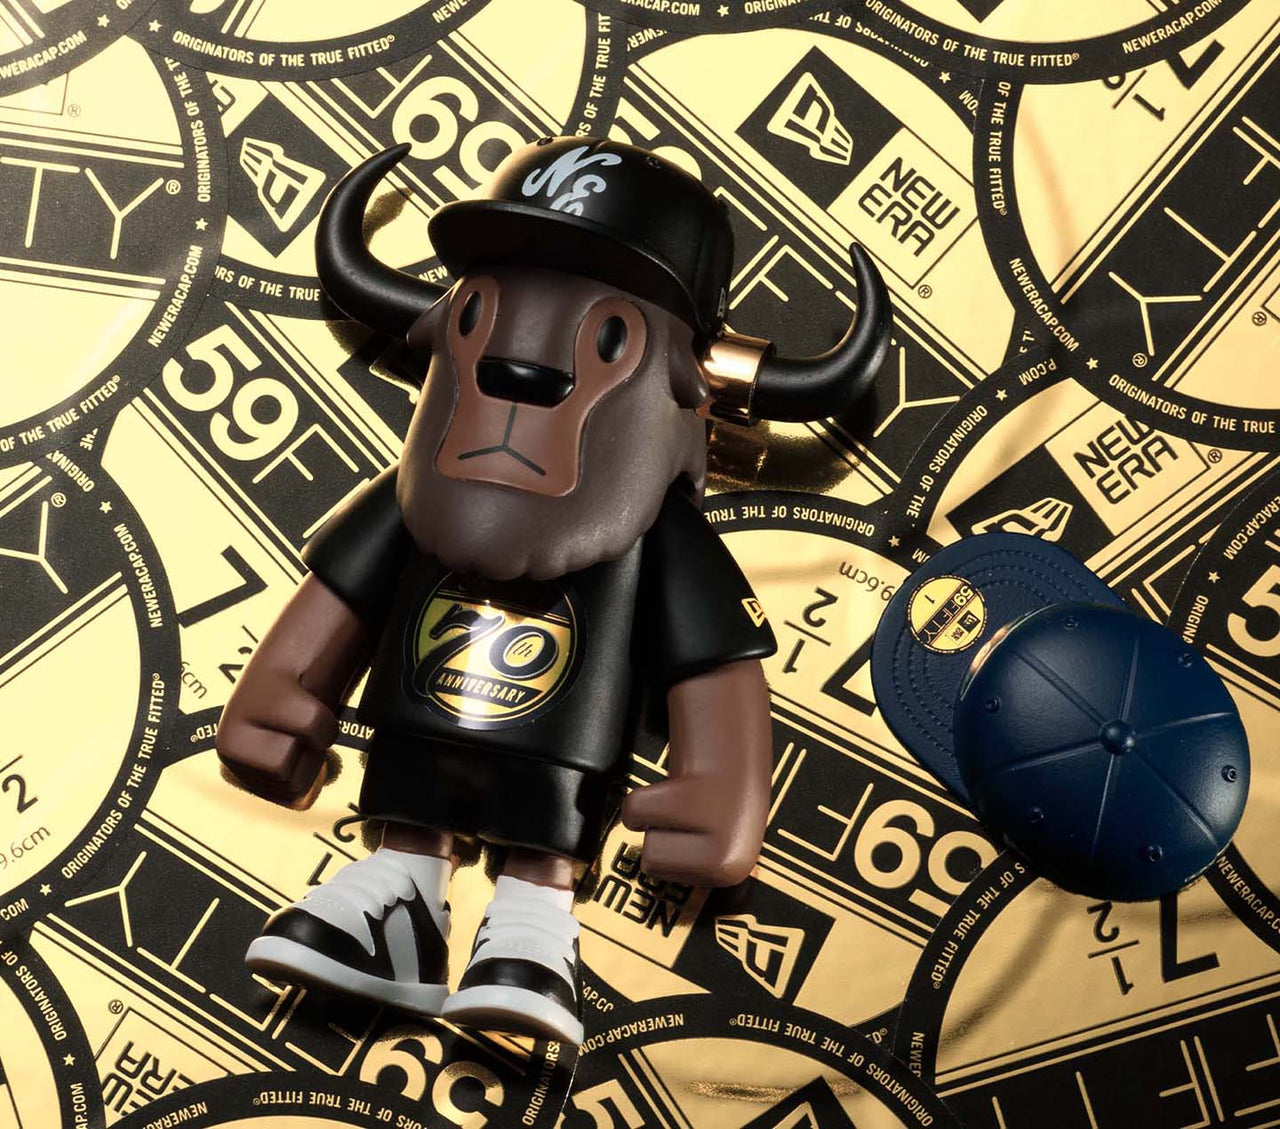 Shop the limited edition FFALO figurine from the 59FIFTY Day 70th Anniversary Collection